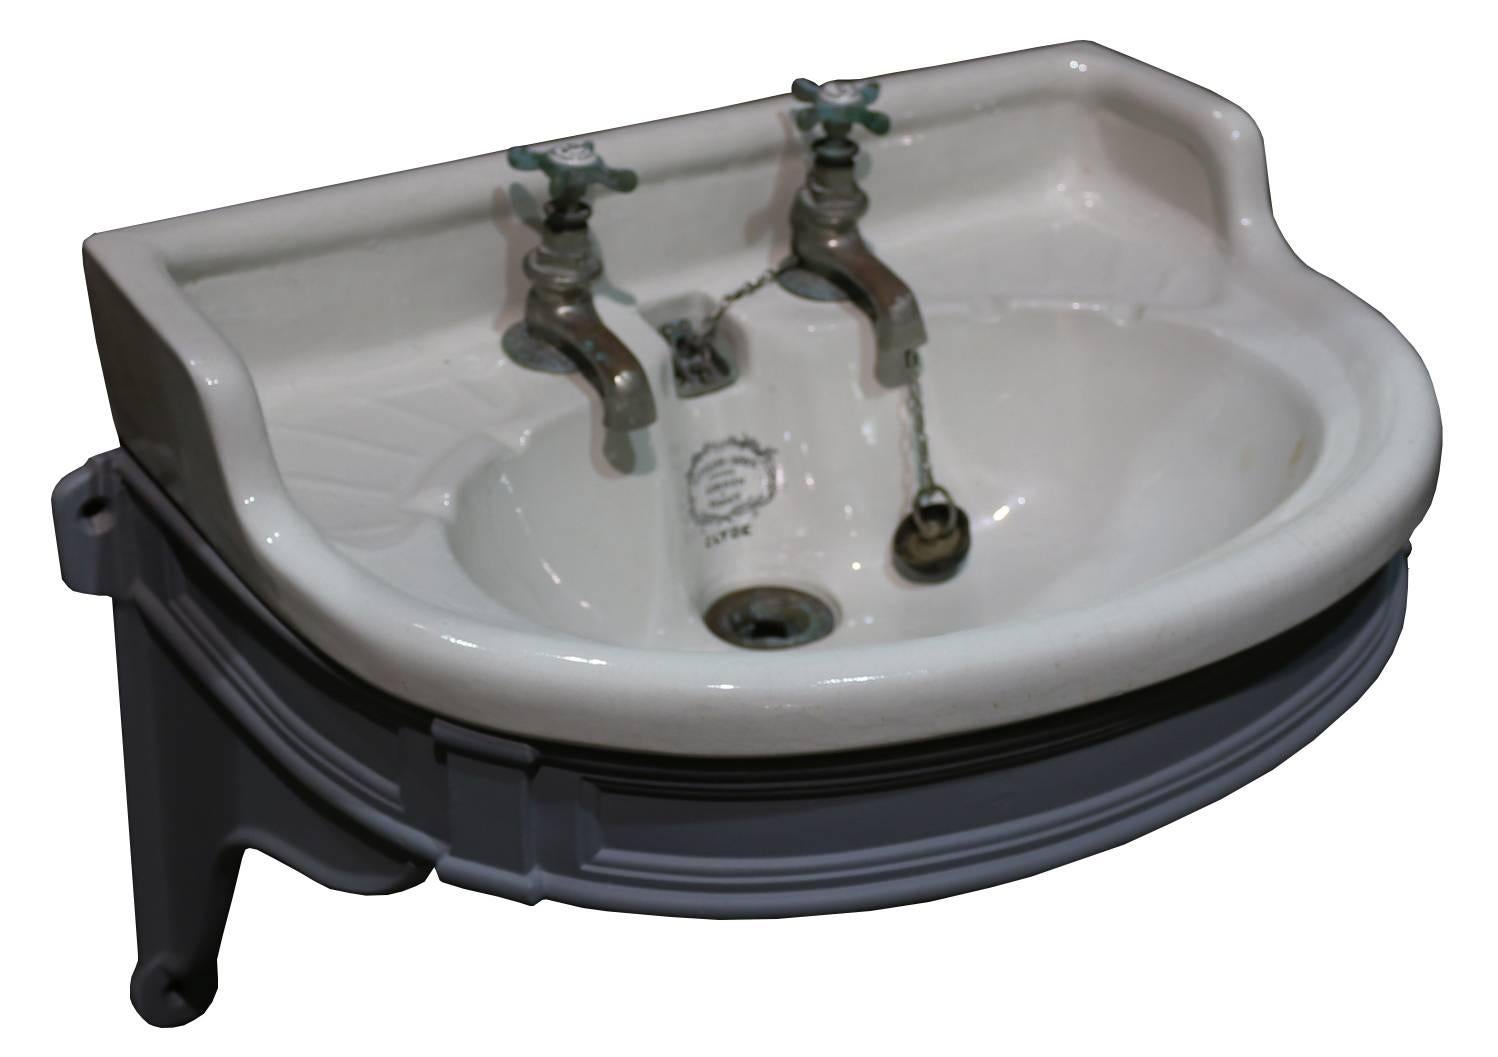 The taps are also by Tylor & Sons and are untested. The basin includes original plugs, chains and waste. The cast iron bracket is completely original and has been finished in a grey primer. The basin is in very good condition with no cracks and does